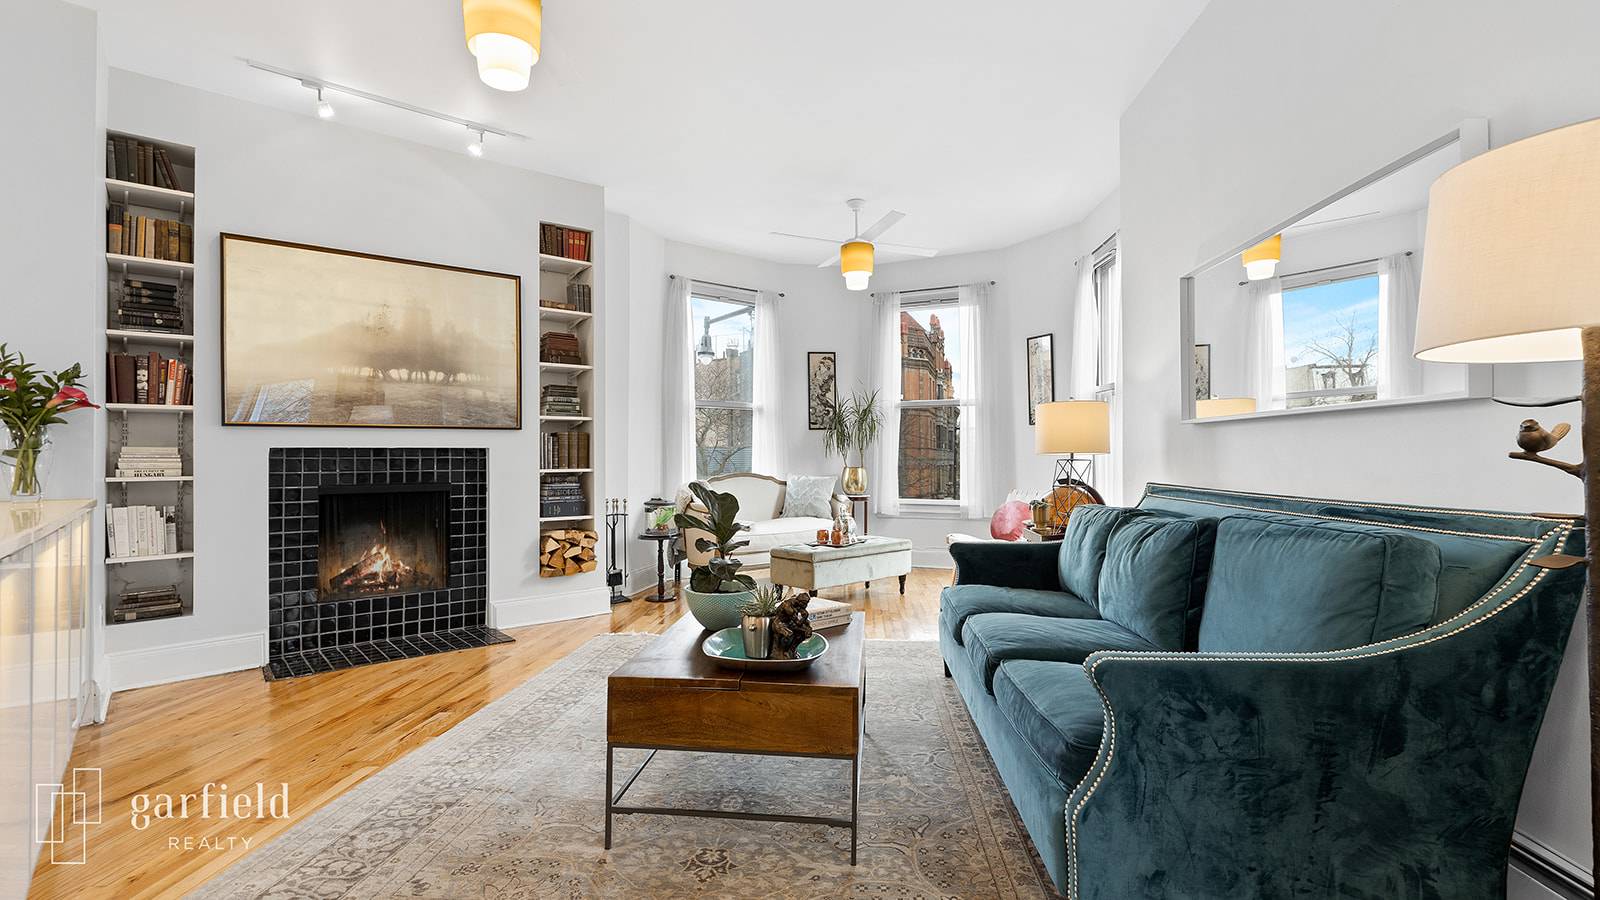 Welcome the warmer weather amid soothing city views from the shared roof deck of this gorgeous 3BR 2BA condop whose light filled 1500 sq ft open floor plan is illuminated ...